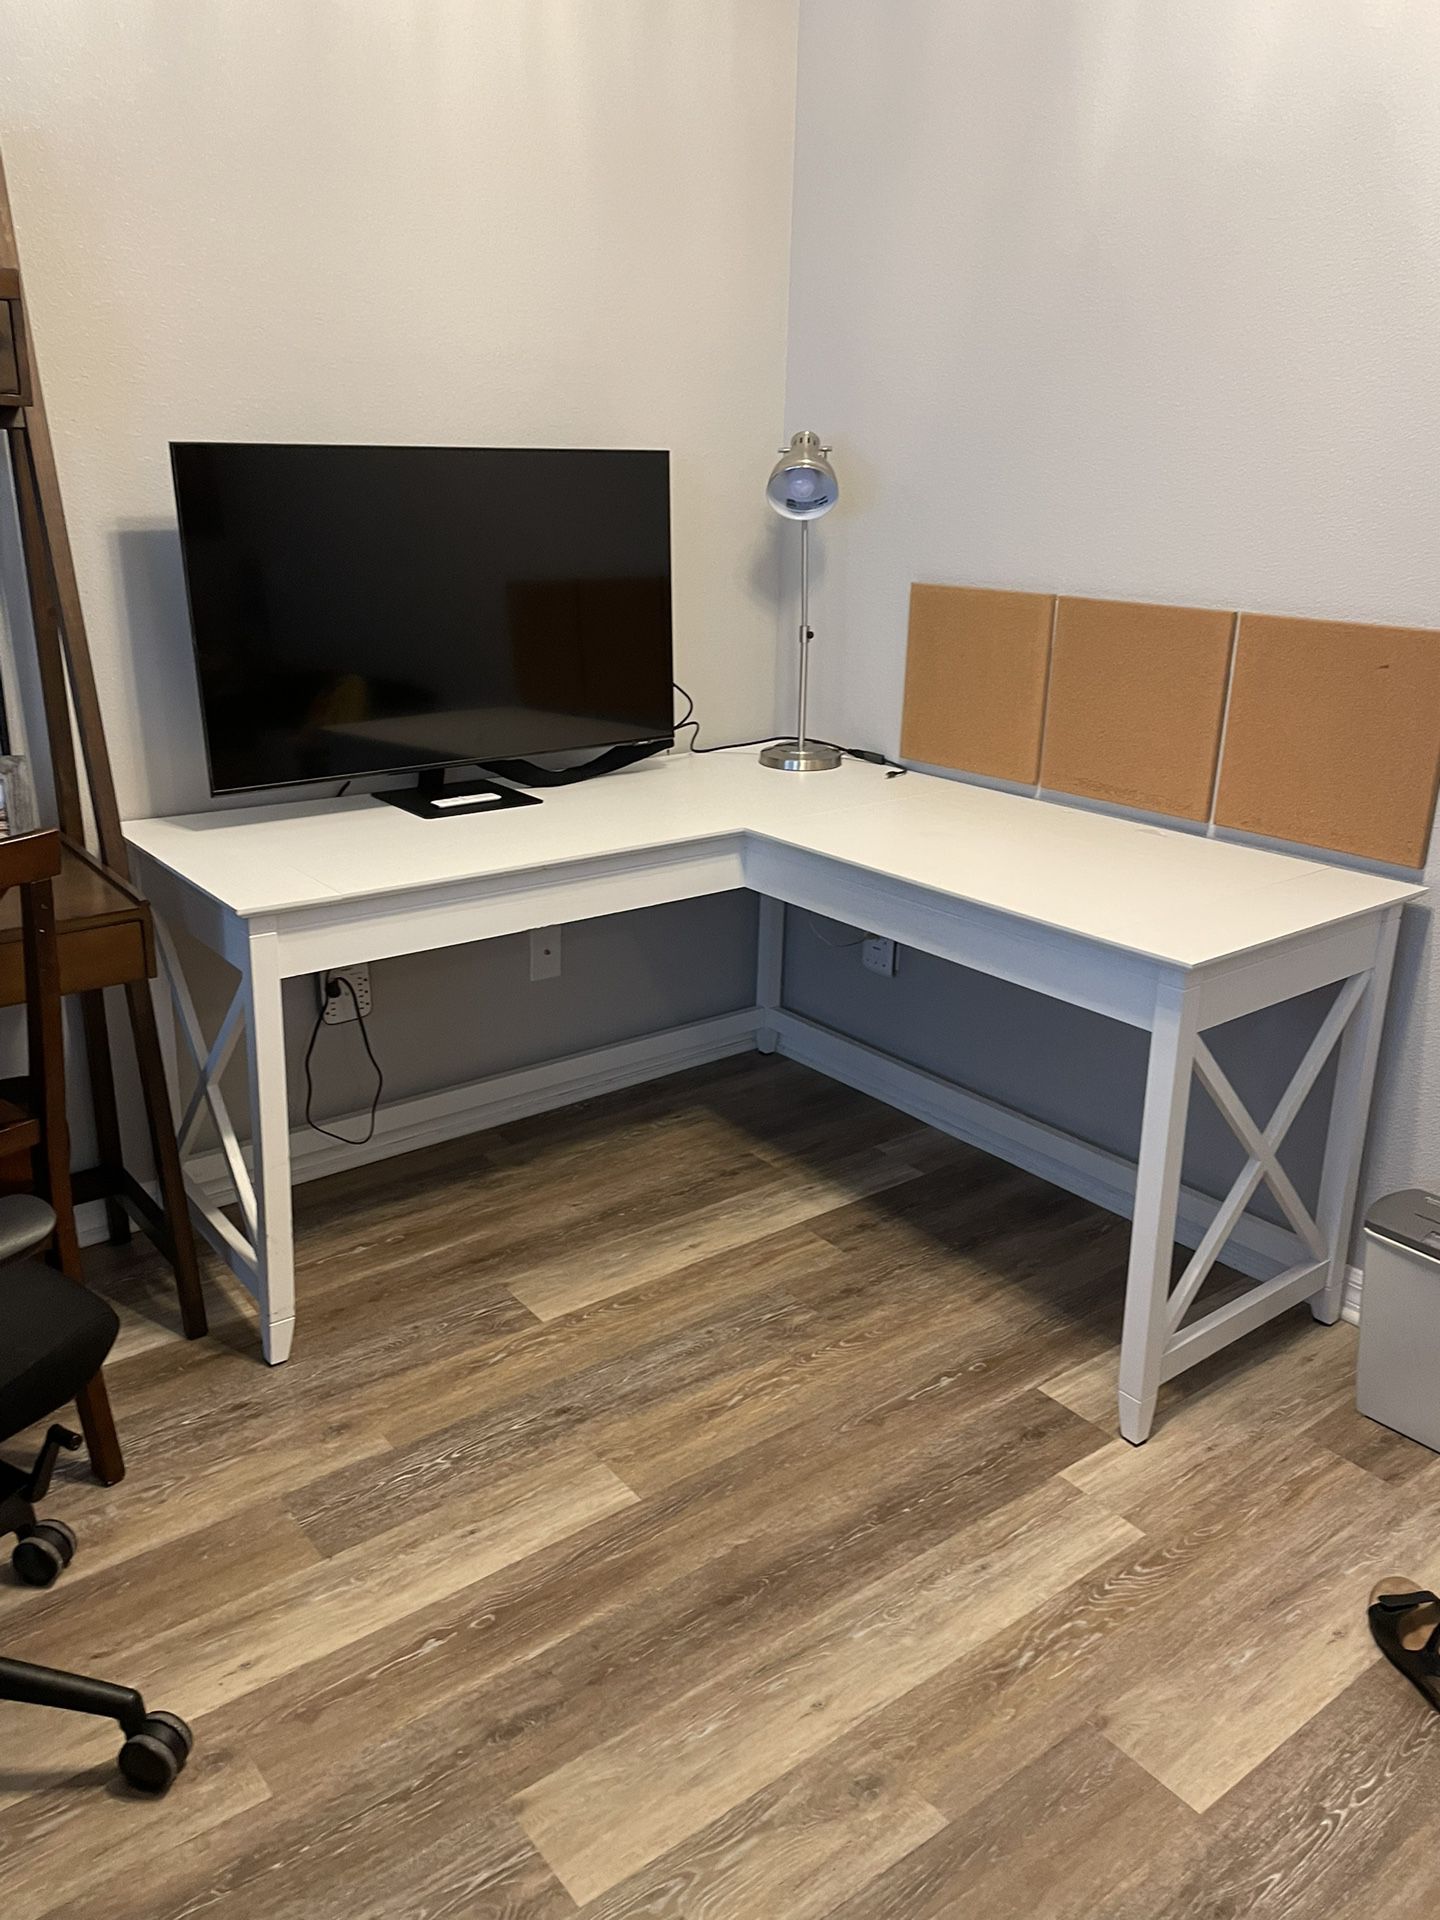 White L-Shaped Desk - $100 Firm